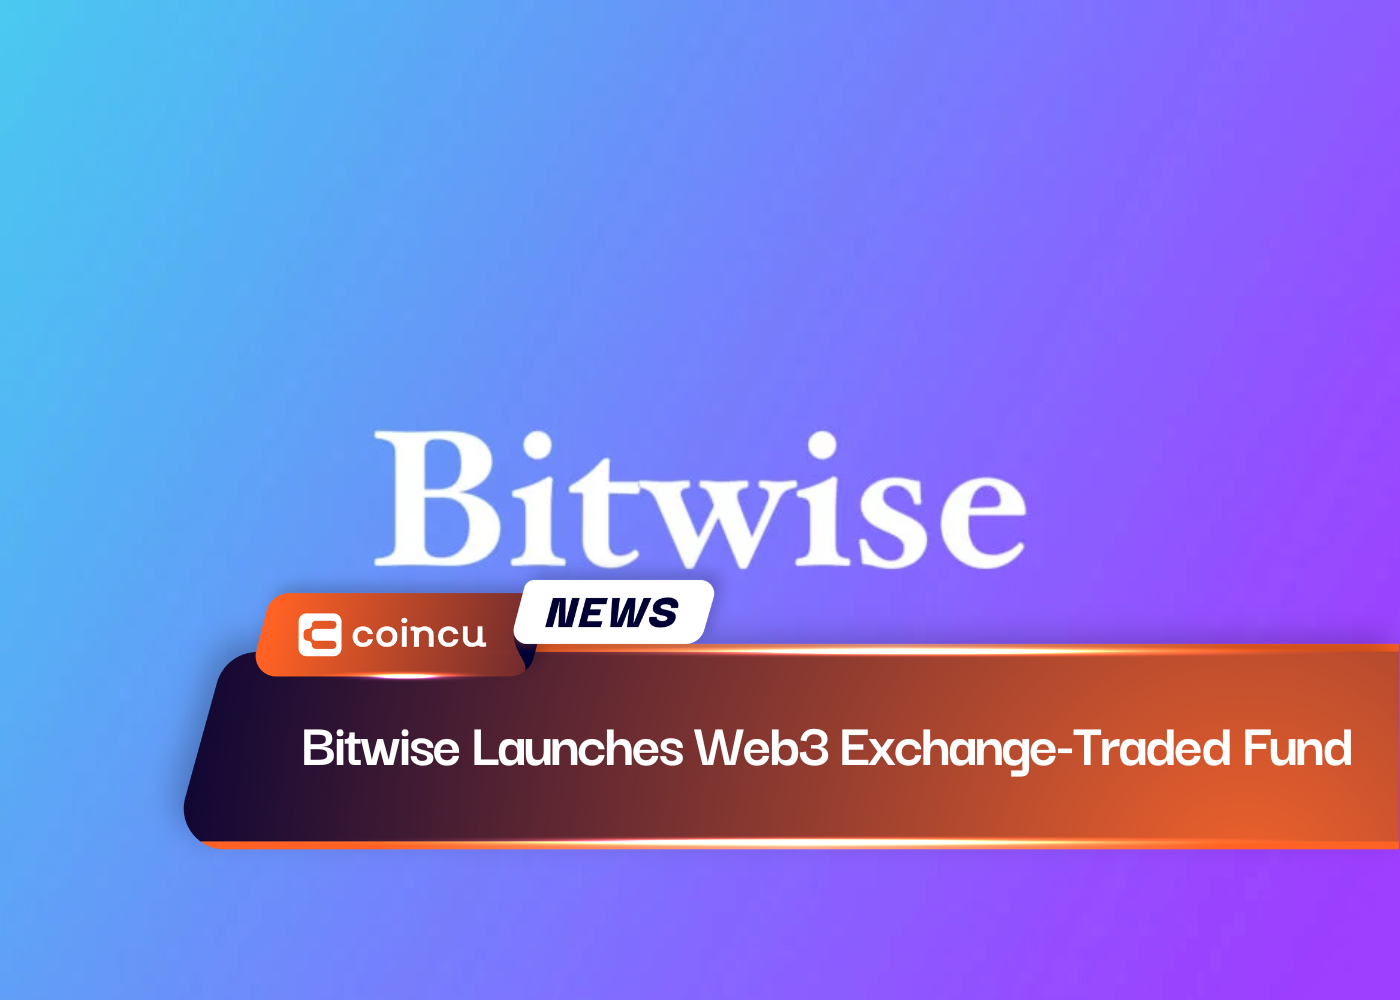 Bitwise Launches Web3 Exchange-Traded Fund